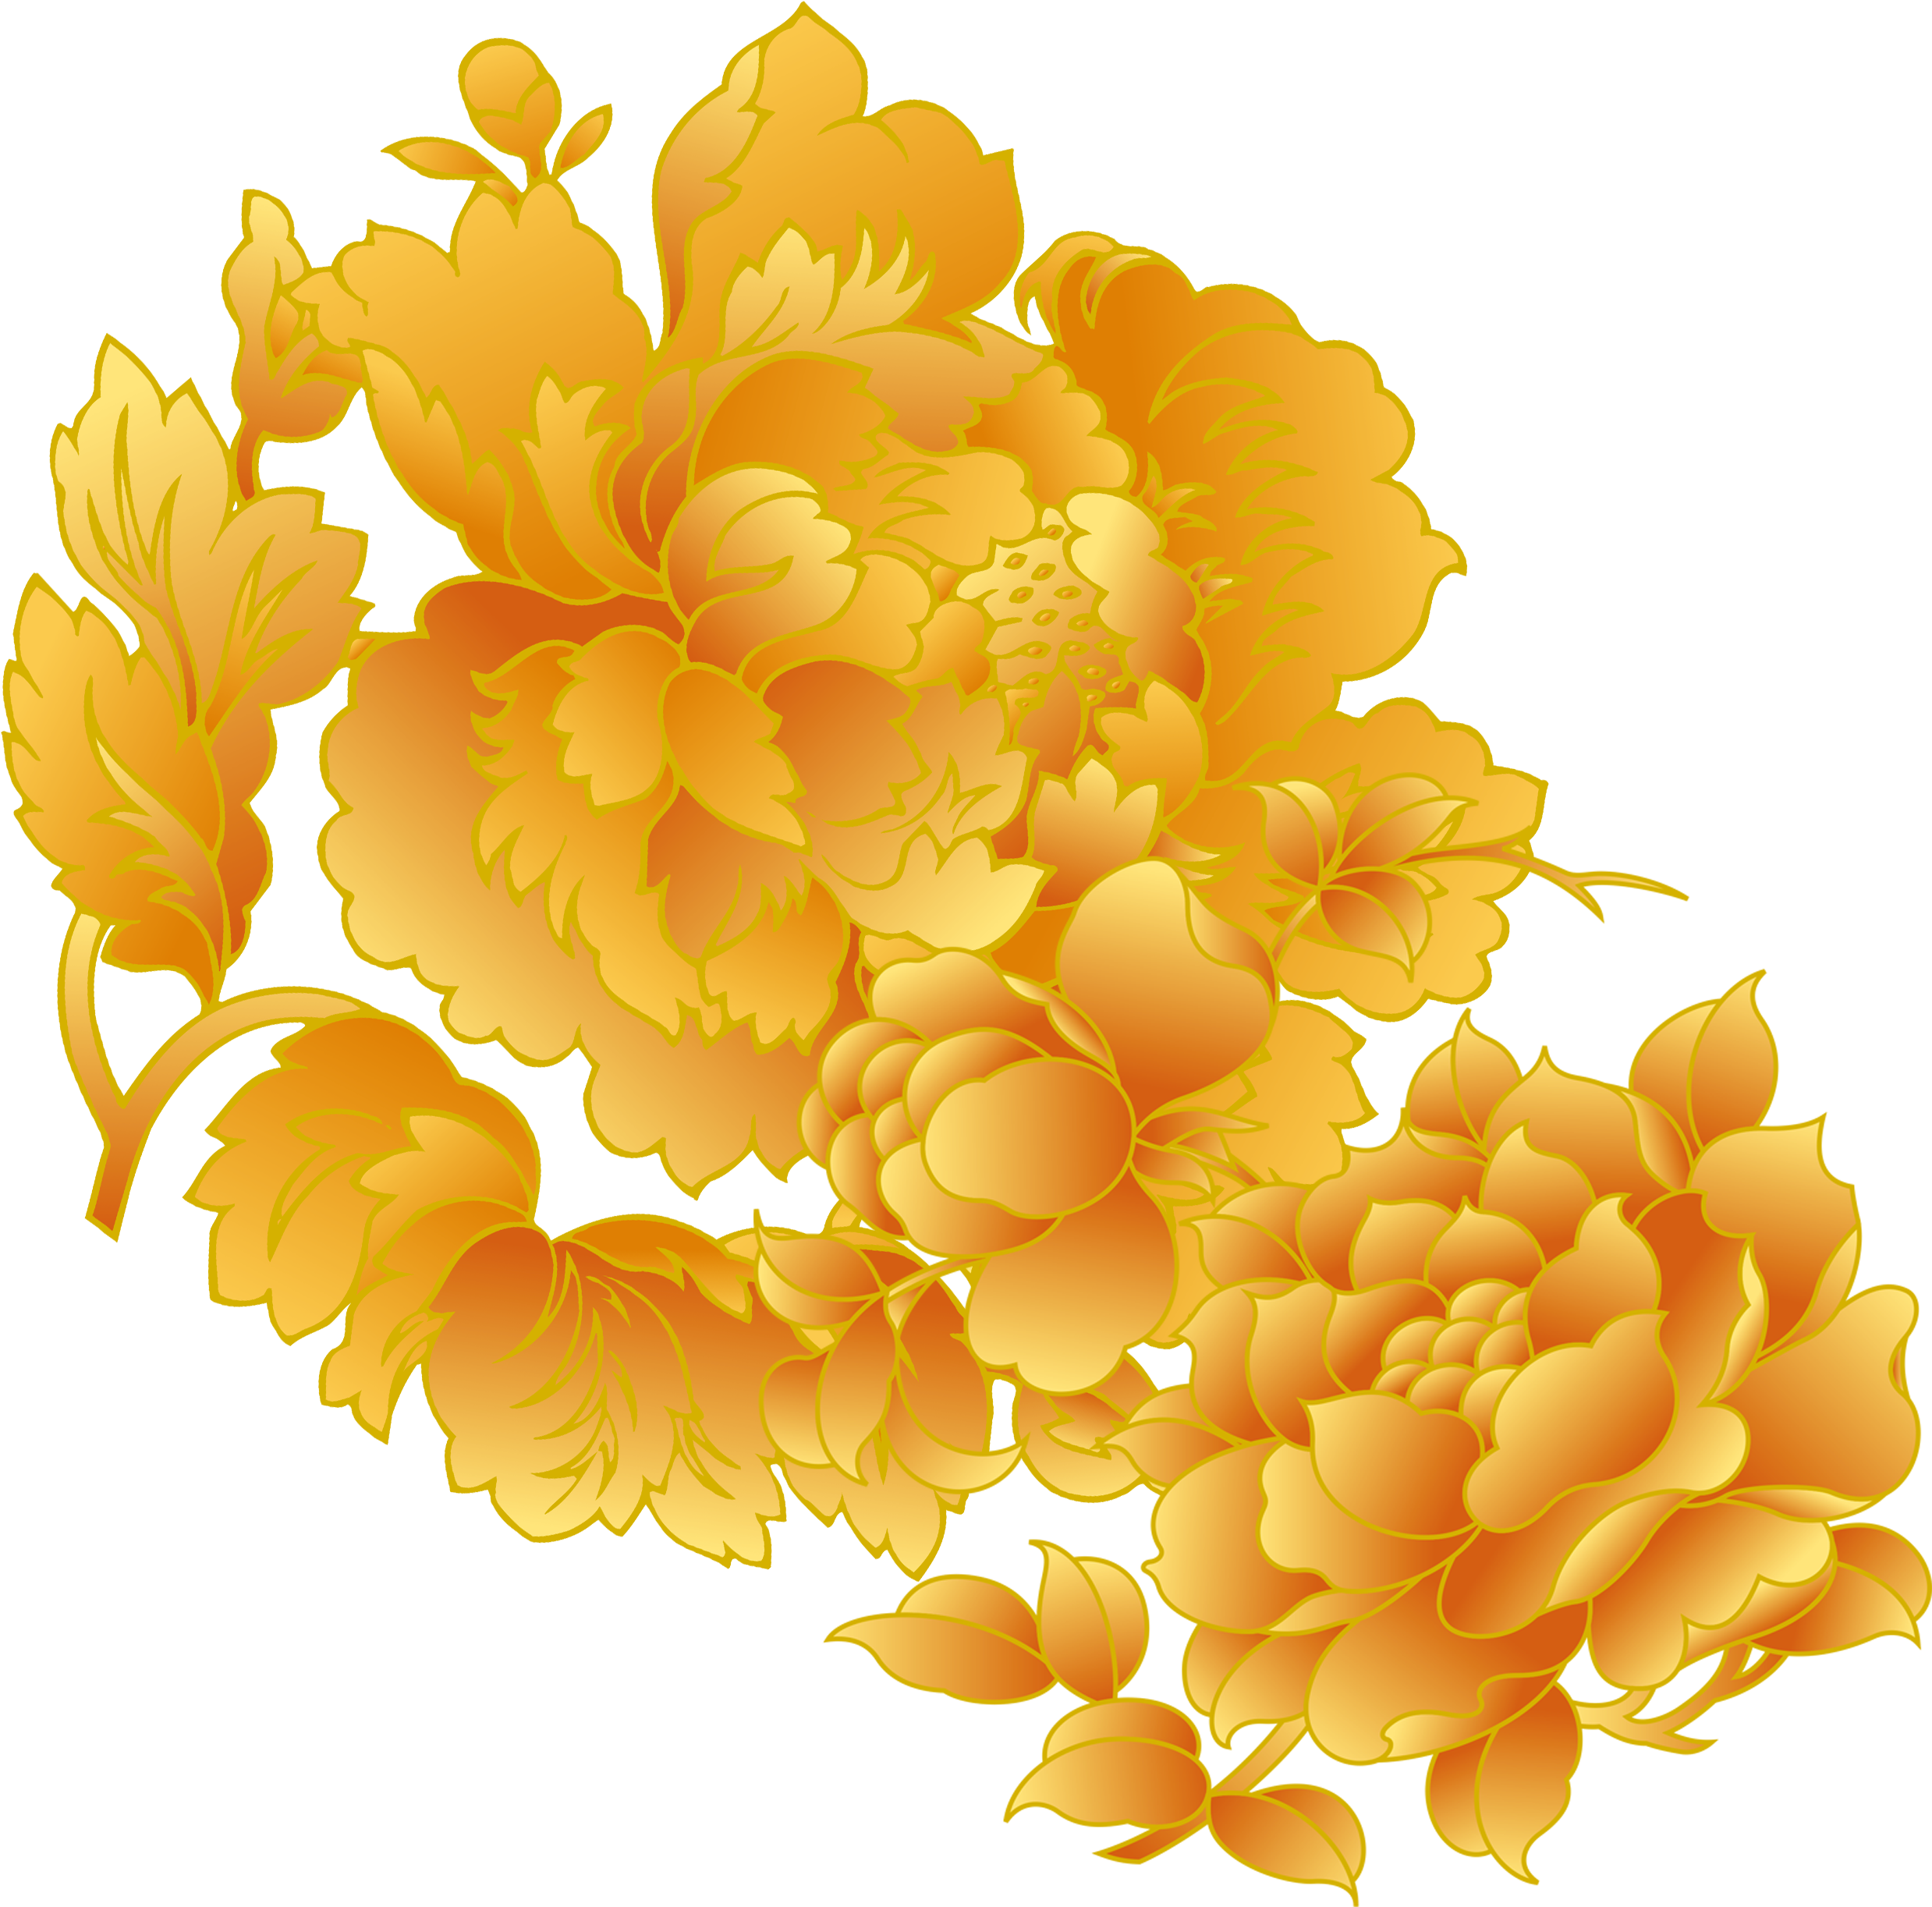 Flor chinesa PNG clipart